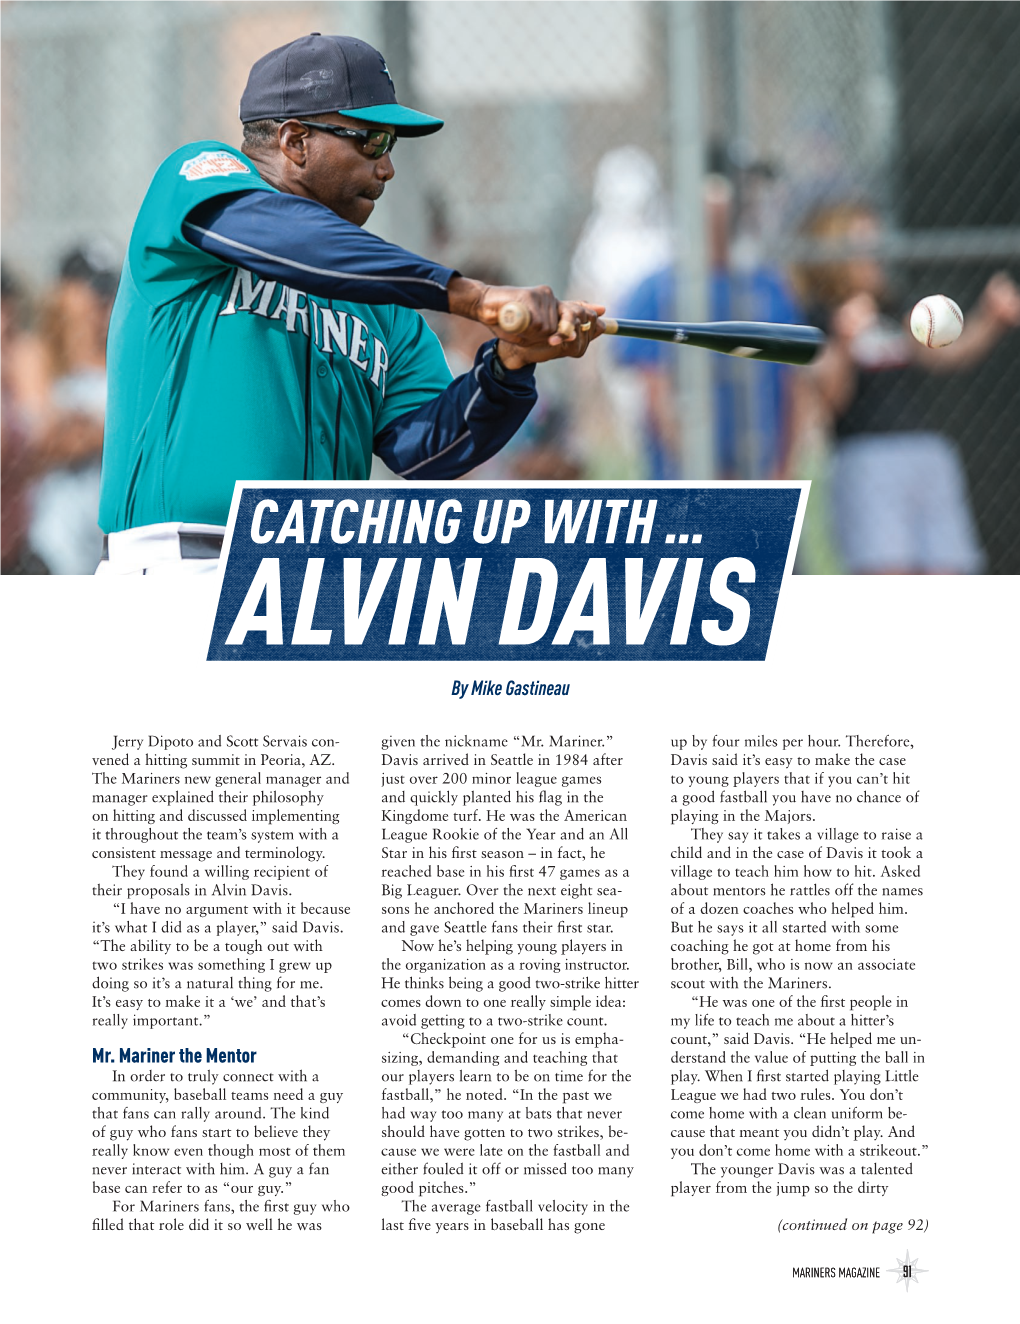 CATCHING up with … ALVIN DAVIS by Mike Gastineau